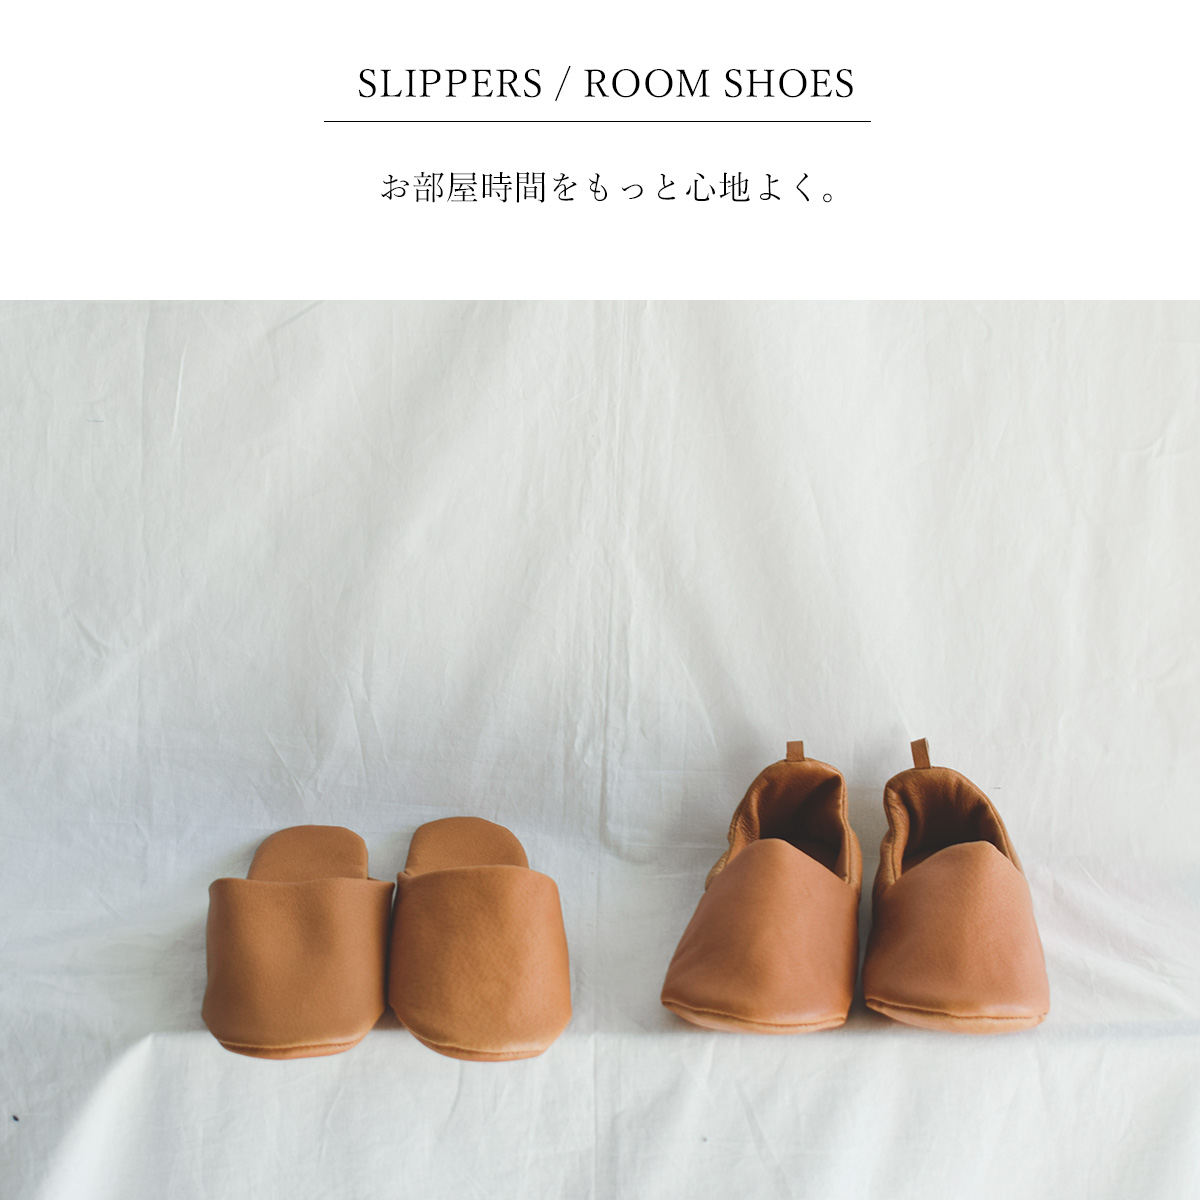 roomshoes-ladysonor(\i[)sbOXLXbpgSLIPPERS LADYh slippers-lady